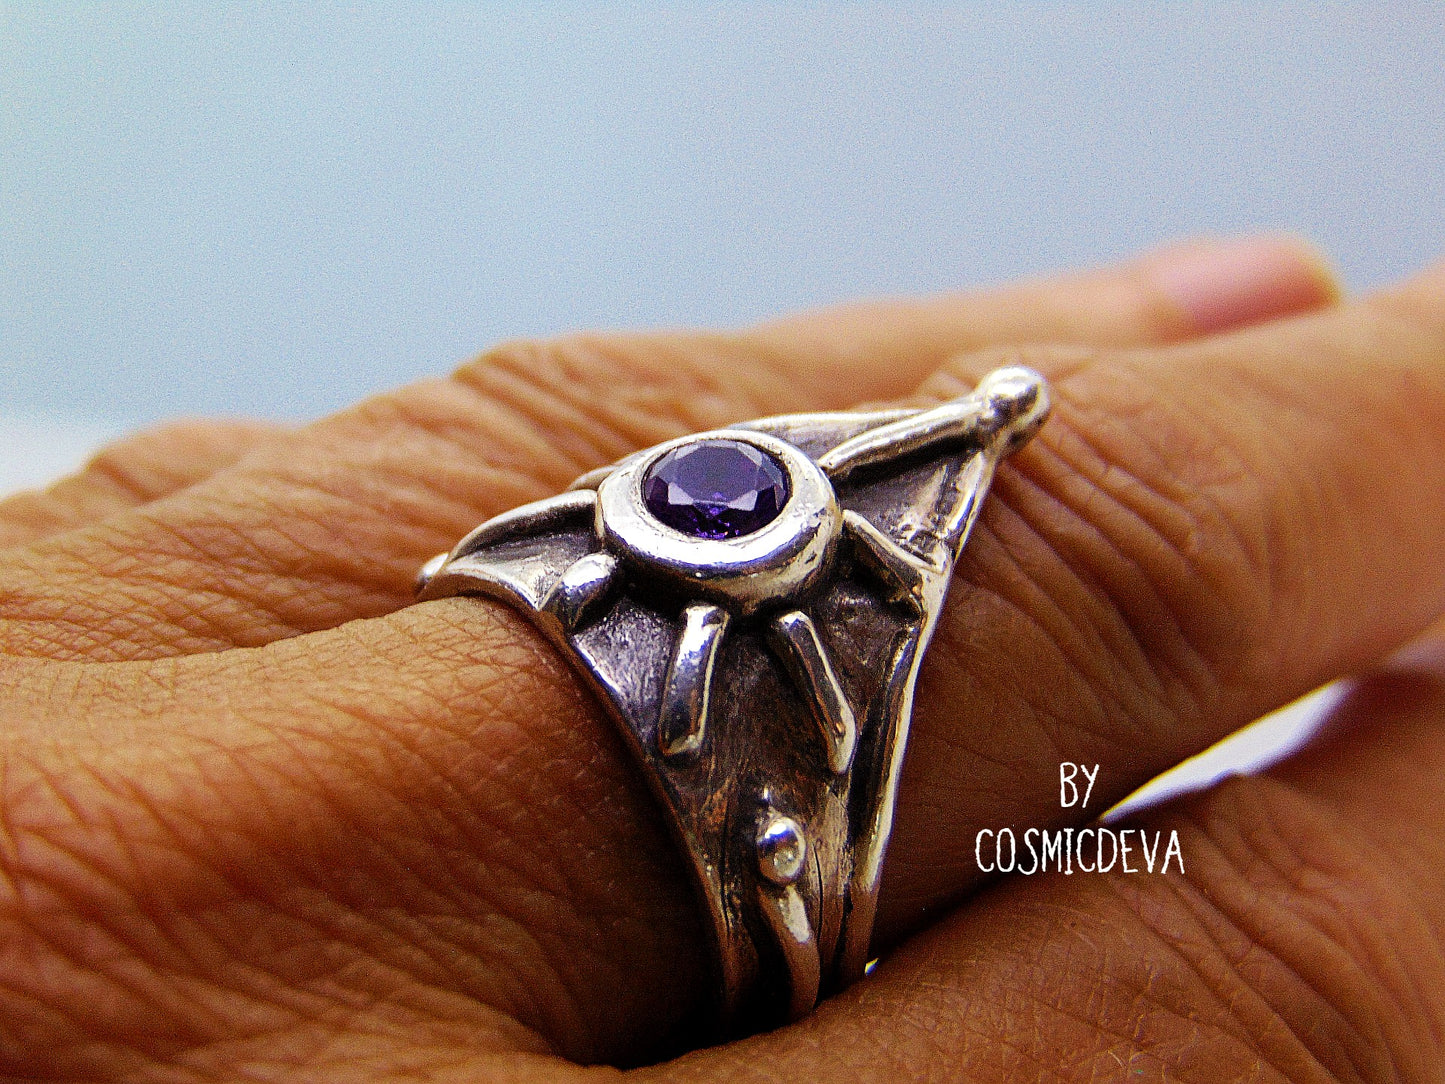 Medieval Shield Triangle Fine Silver Amethyst US size 7 Ring. Unique handcrafted medieval triangle shaped shield silver ring with a 5 mm round amethyst stone. This Ring is made of solid .999 fine silver and hallmarked as it. The ring was oxidized to give it a vintage antique design. - CosmicDeva